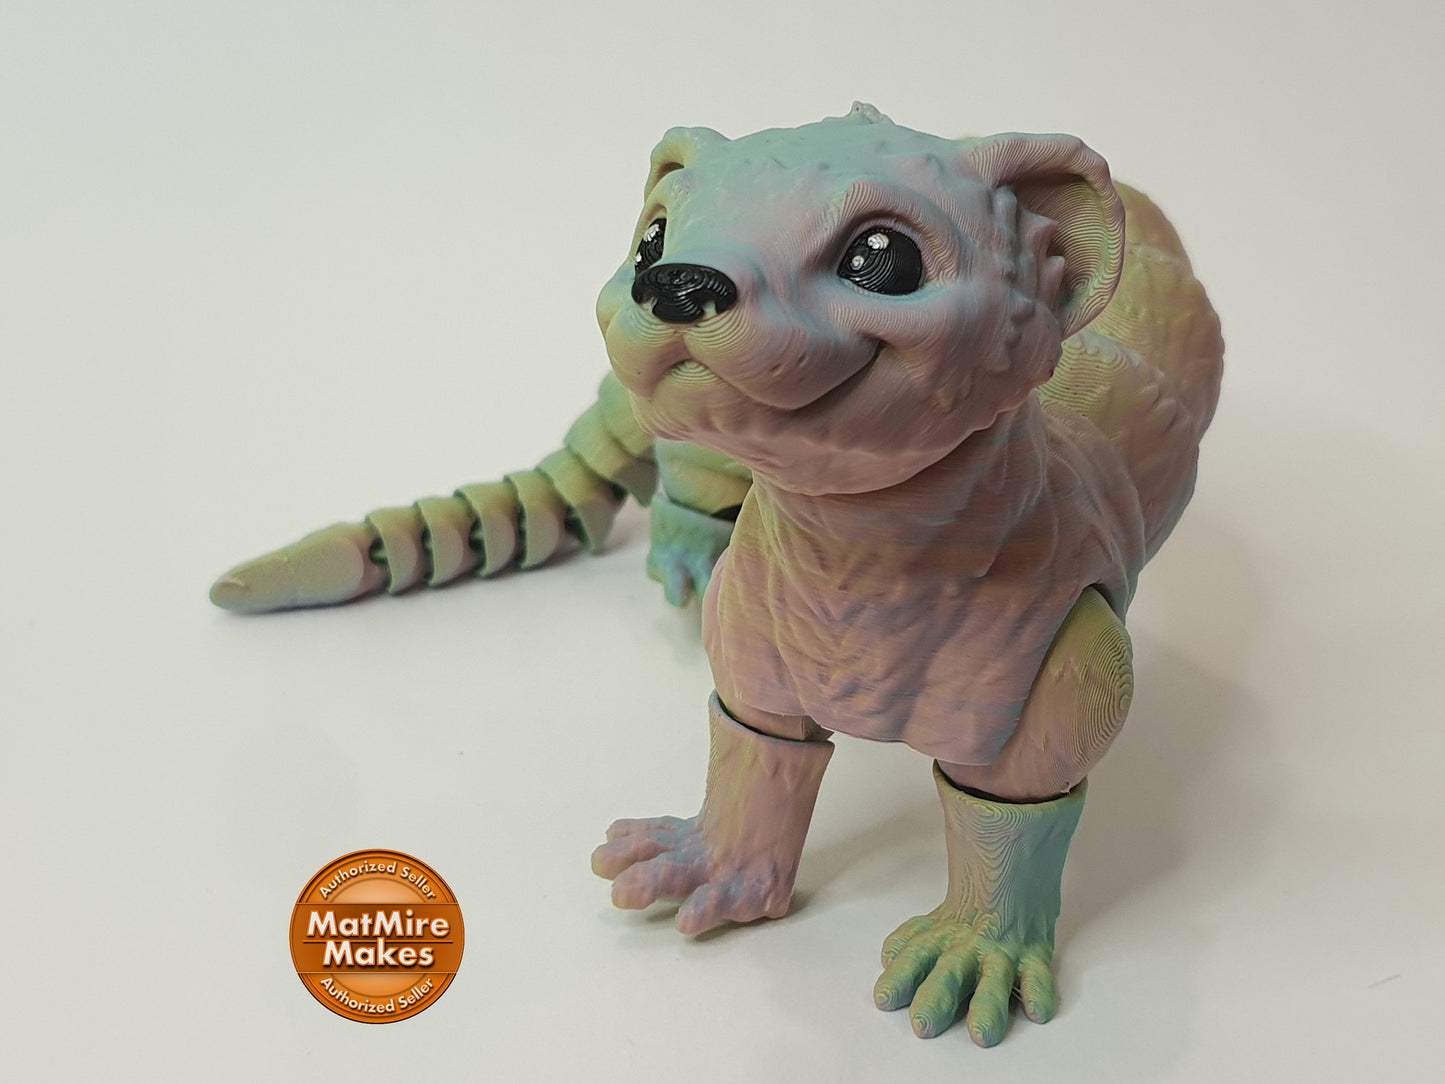 Cute Flexi Ferret/Polecat/Cat Snake -  Articulated Flexible 3D Print - Hand painted details - Can be printed any colour you like!